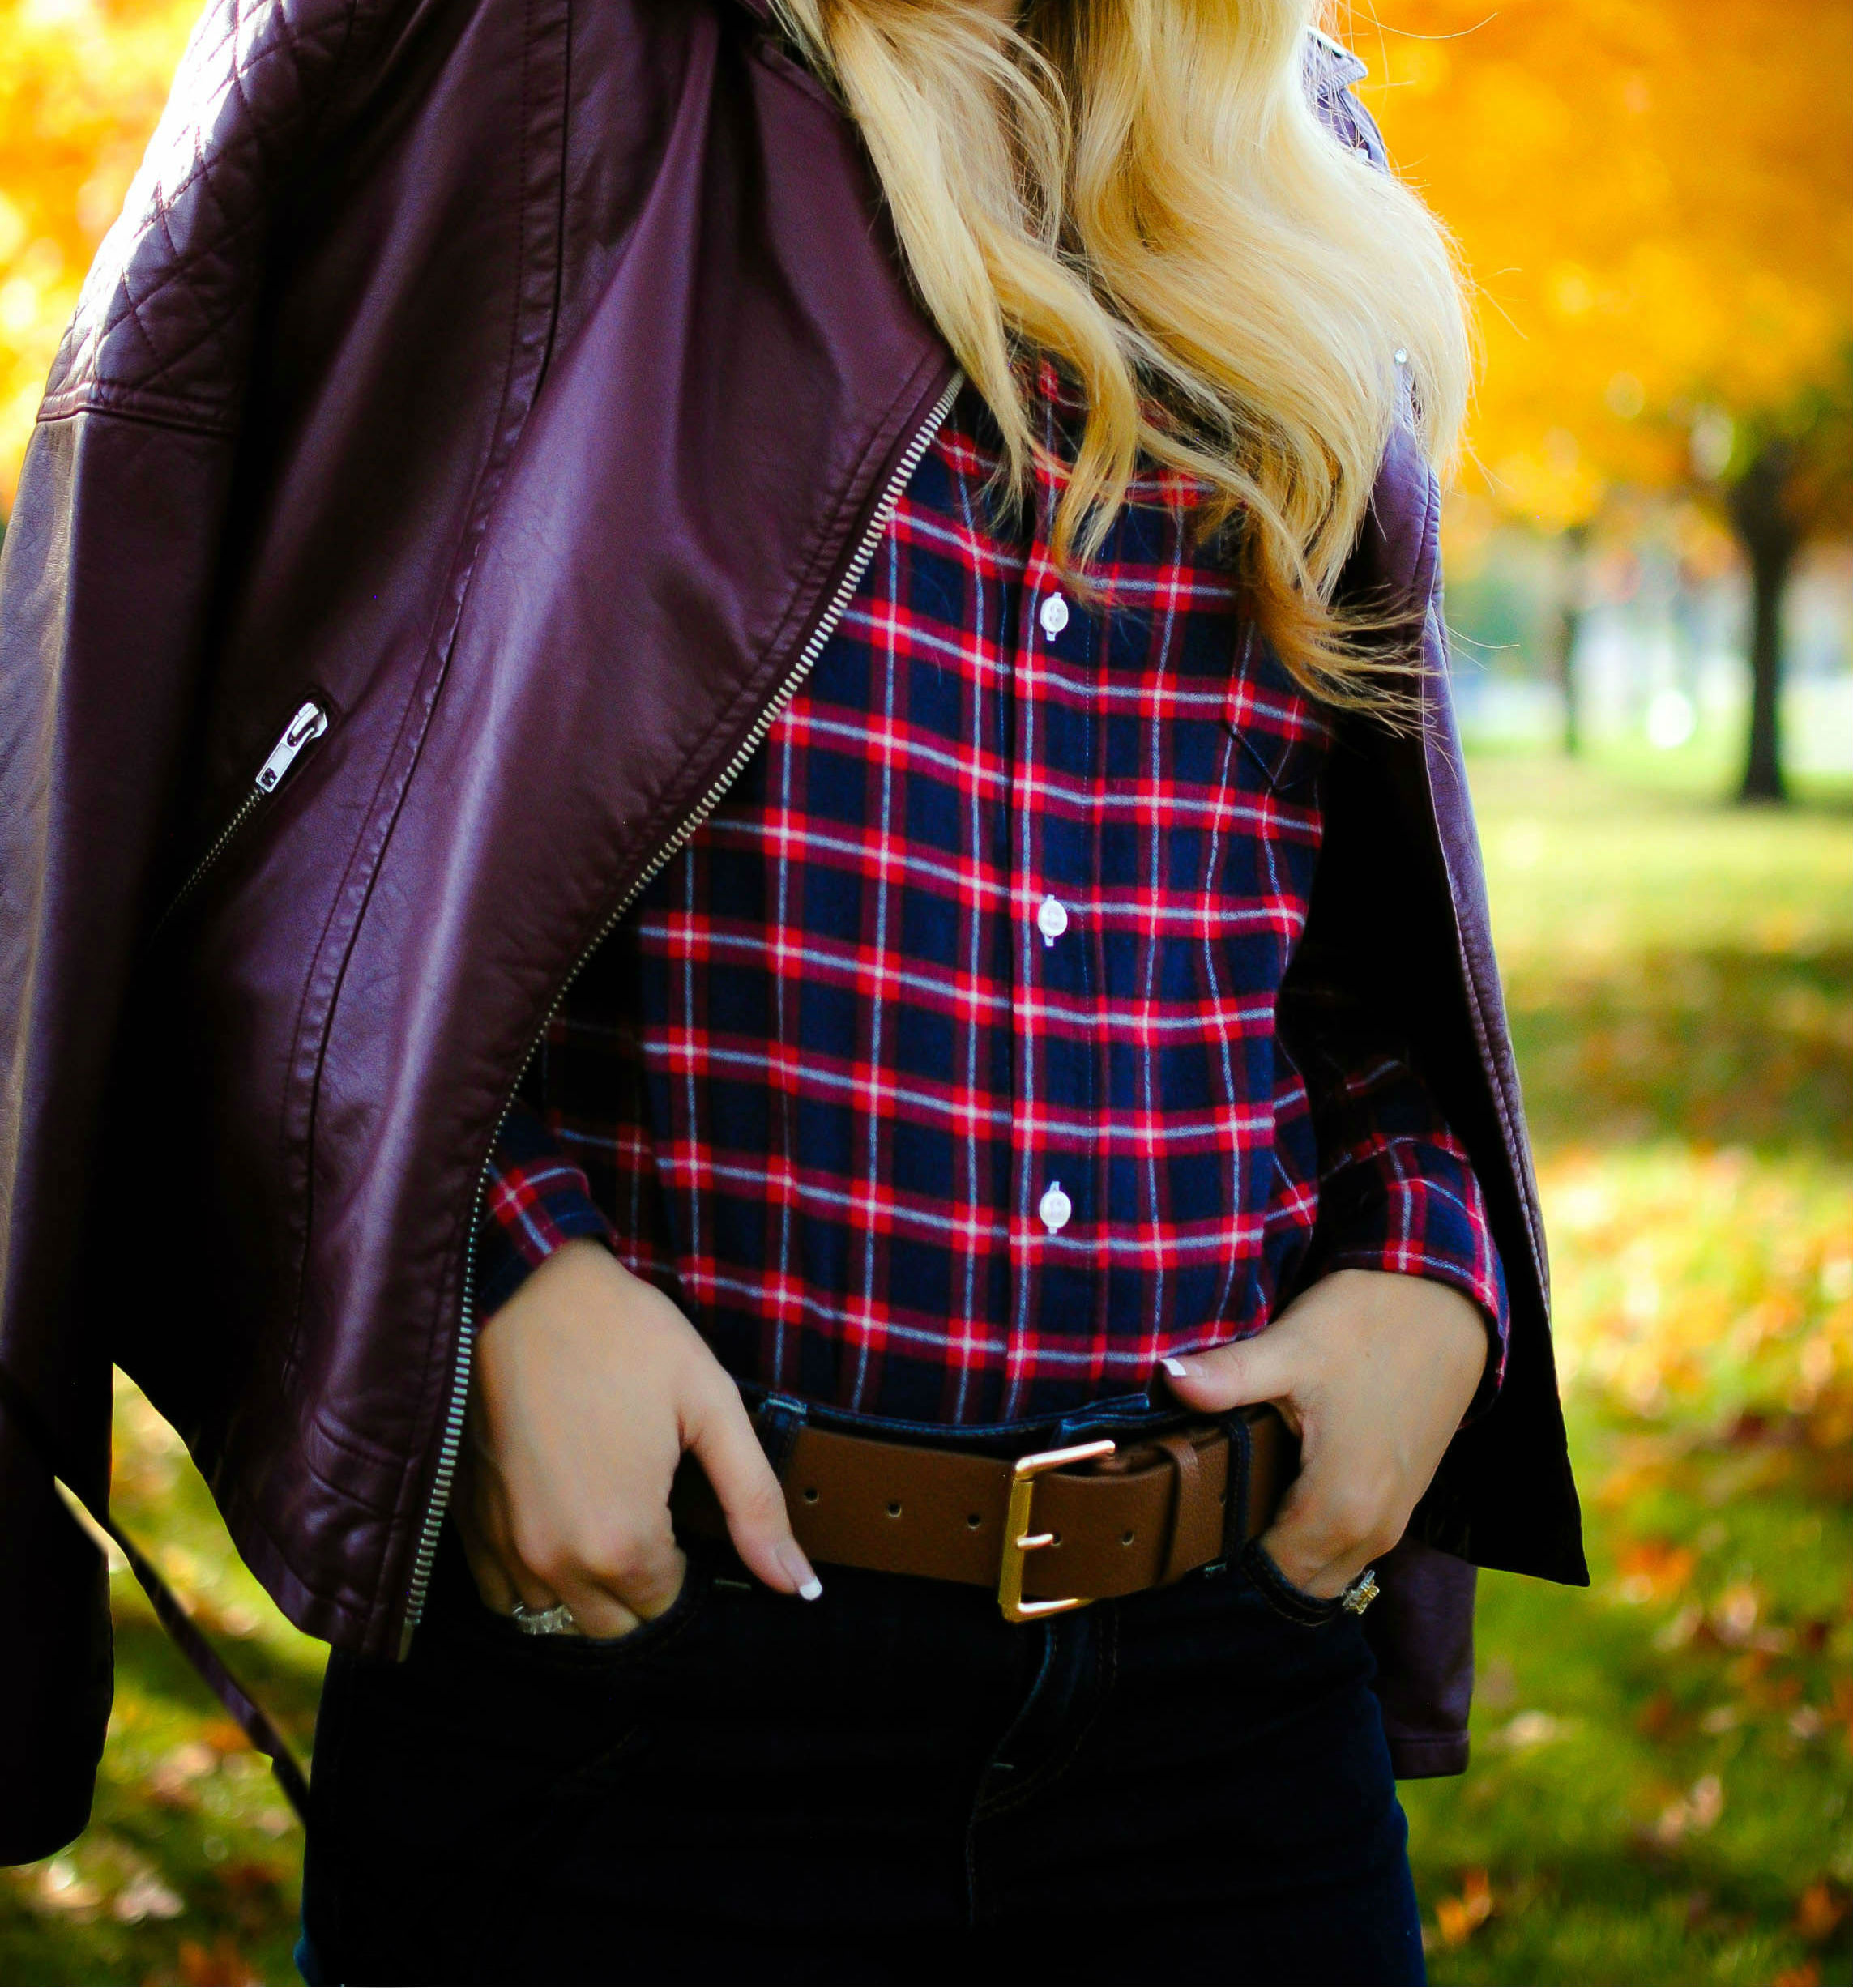 vanessa-lambert-blogger-behind-what-would-v-wear-wears-a-plaid-shirt-for-fall-paired-with-jeans-and-a-burgundy-colored-moto-jacket_3